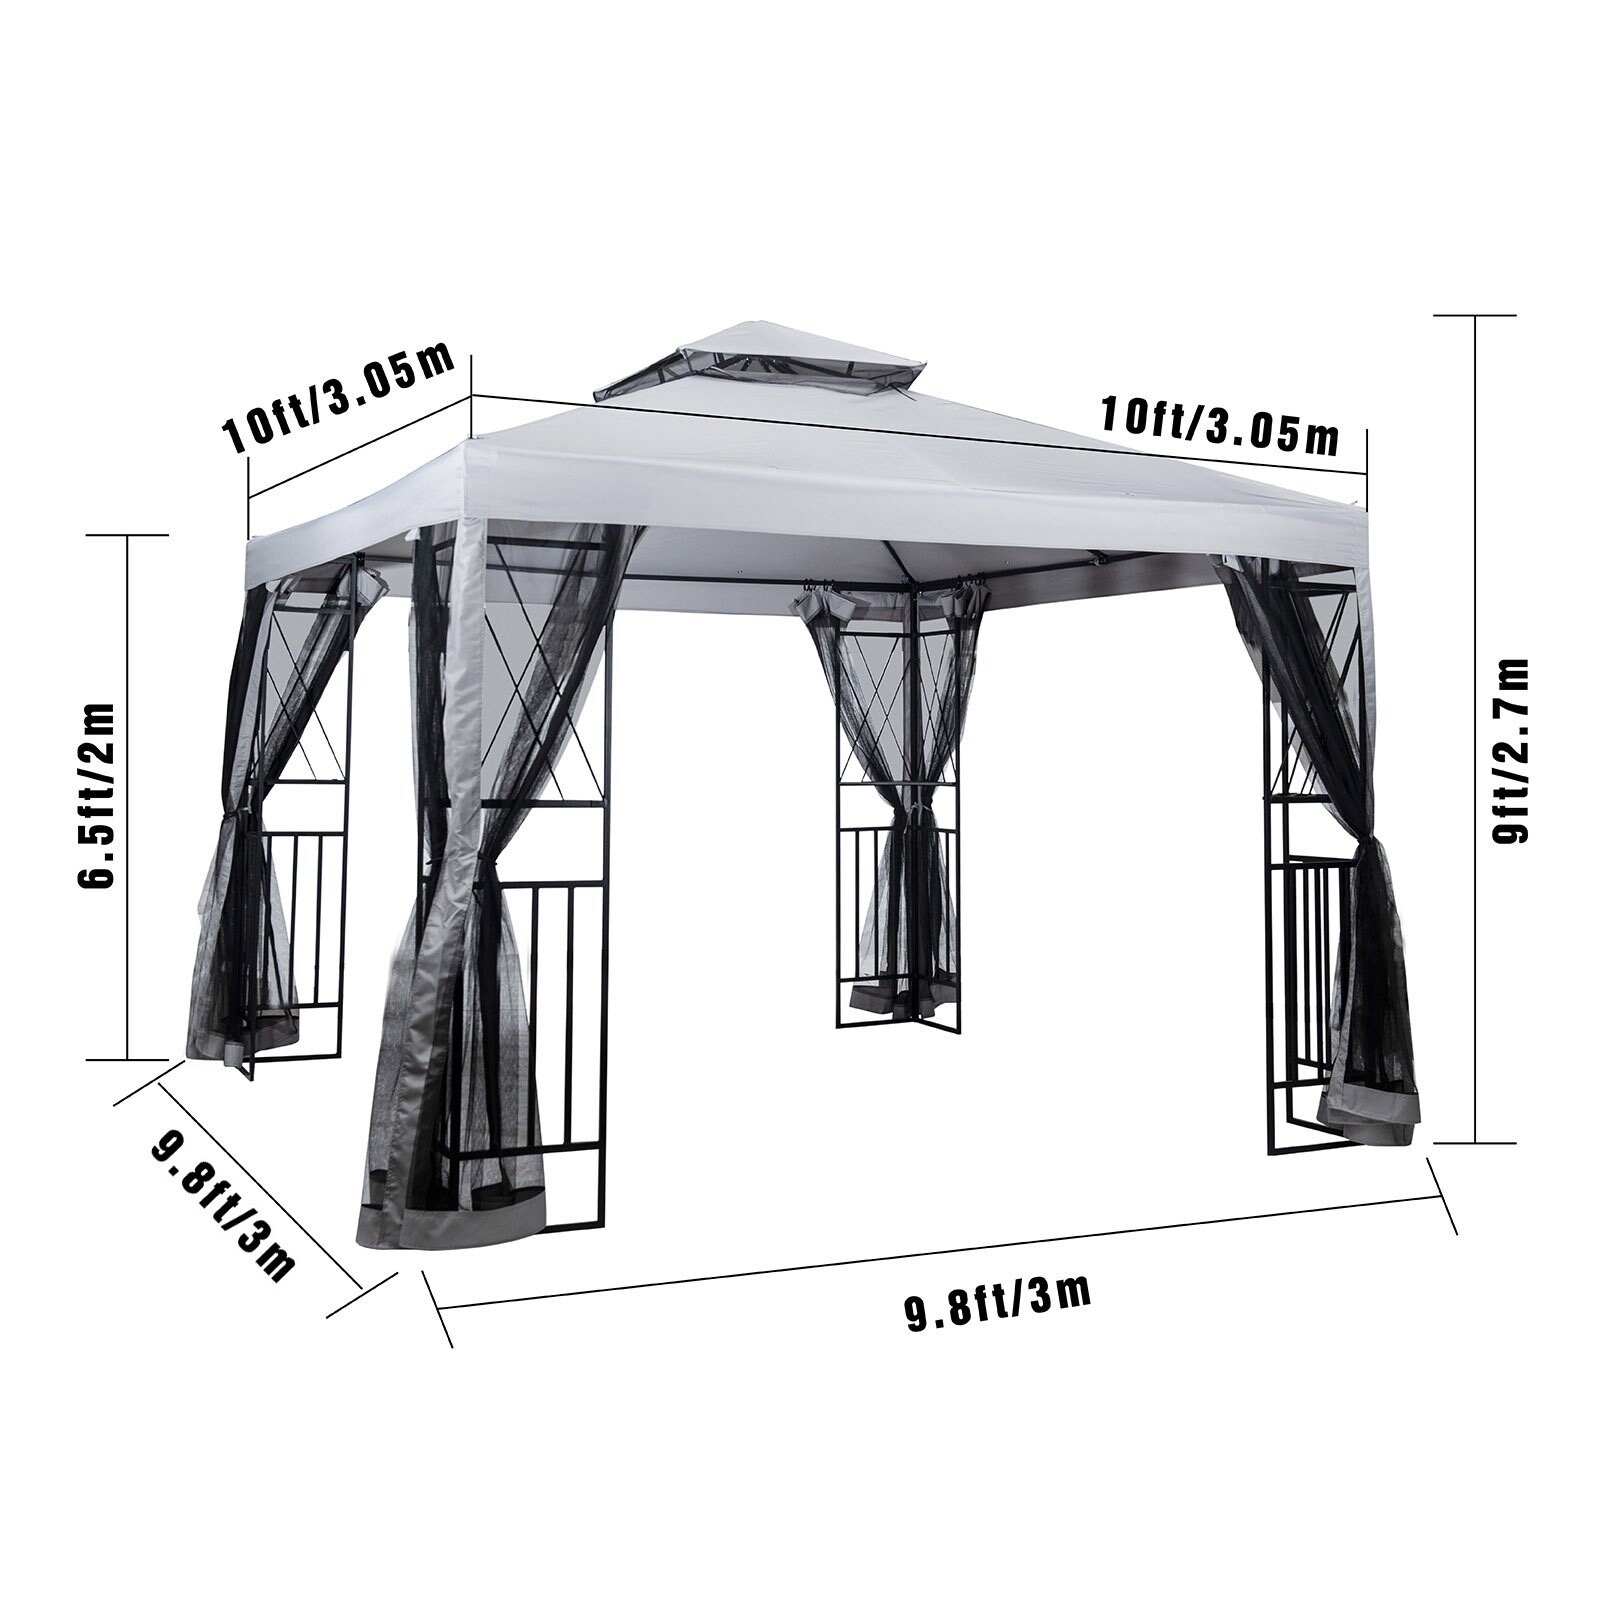 10' x 10' Patio Gazebo with Mosquito Net, Corner Shelves, and 2-Tier Ventilated Top